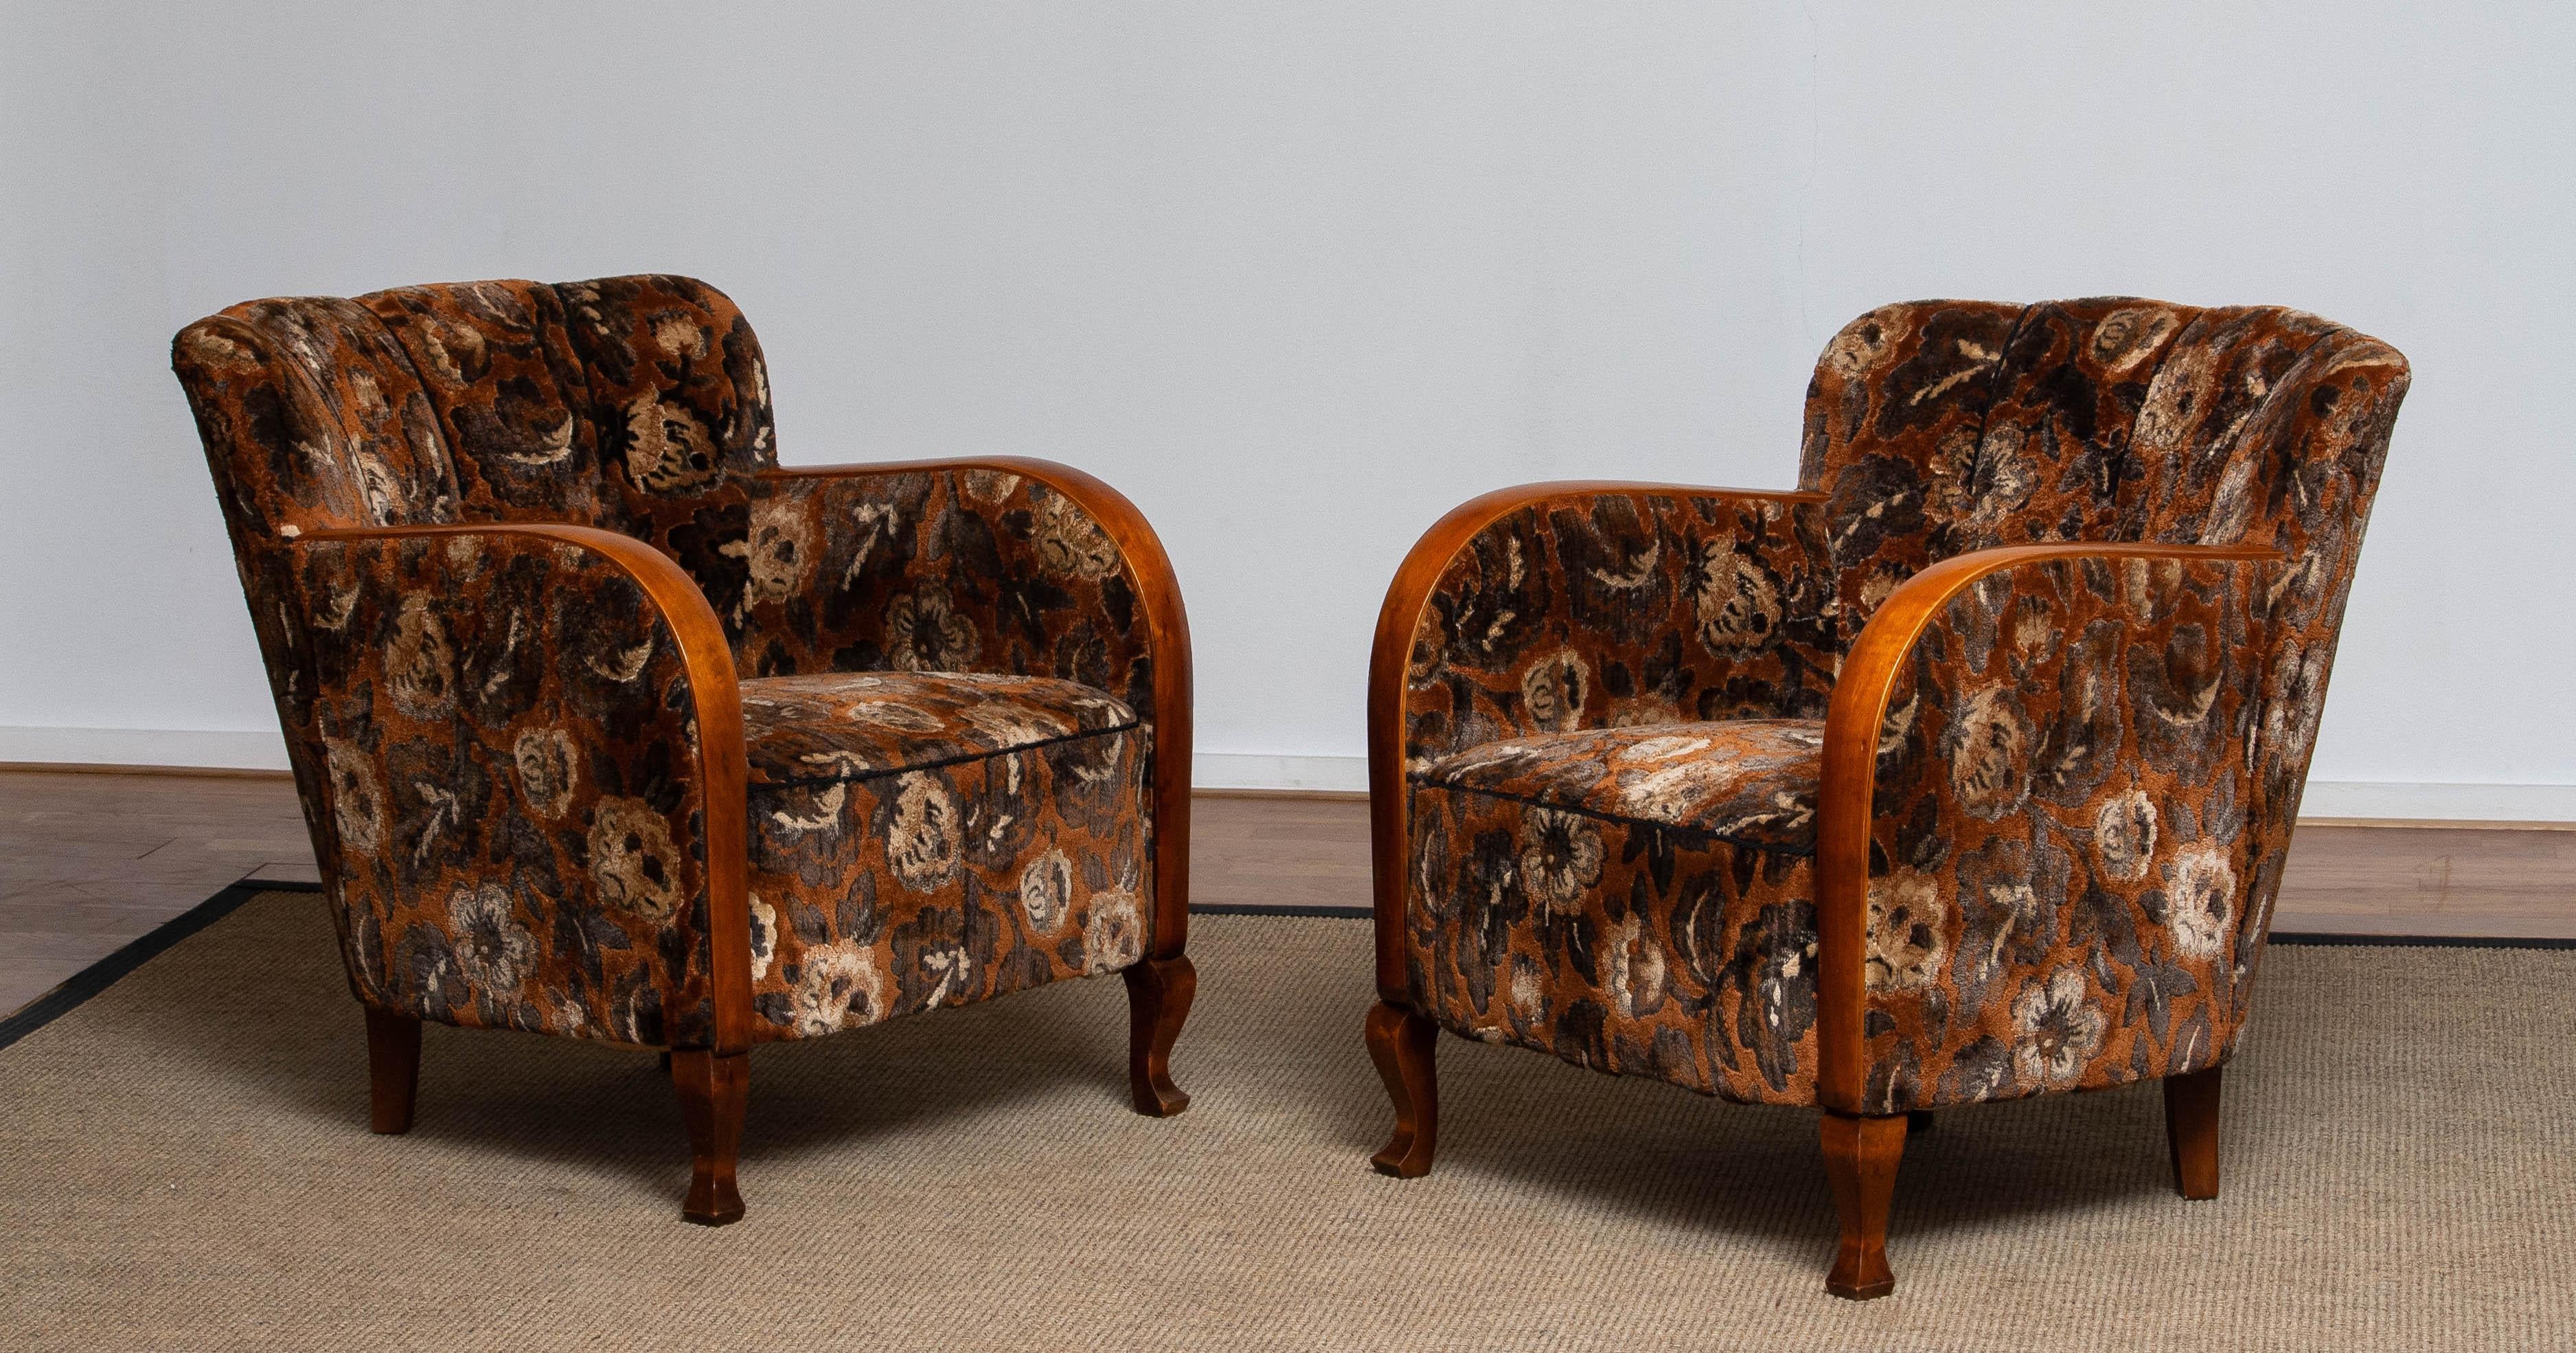 Beautiful set of two Art Deco 1930's armchairs / lounge chairs upholstered with rust colored jacquard velvet from the '50s.
The armrests are made of satin beech. Allover the chairs are in good and clean condition.
Sit comfort is excellent.